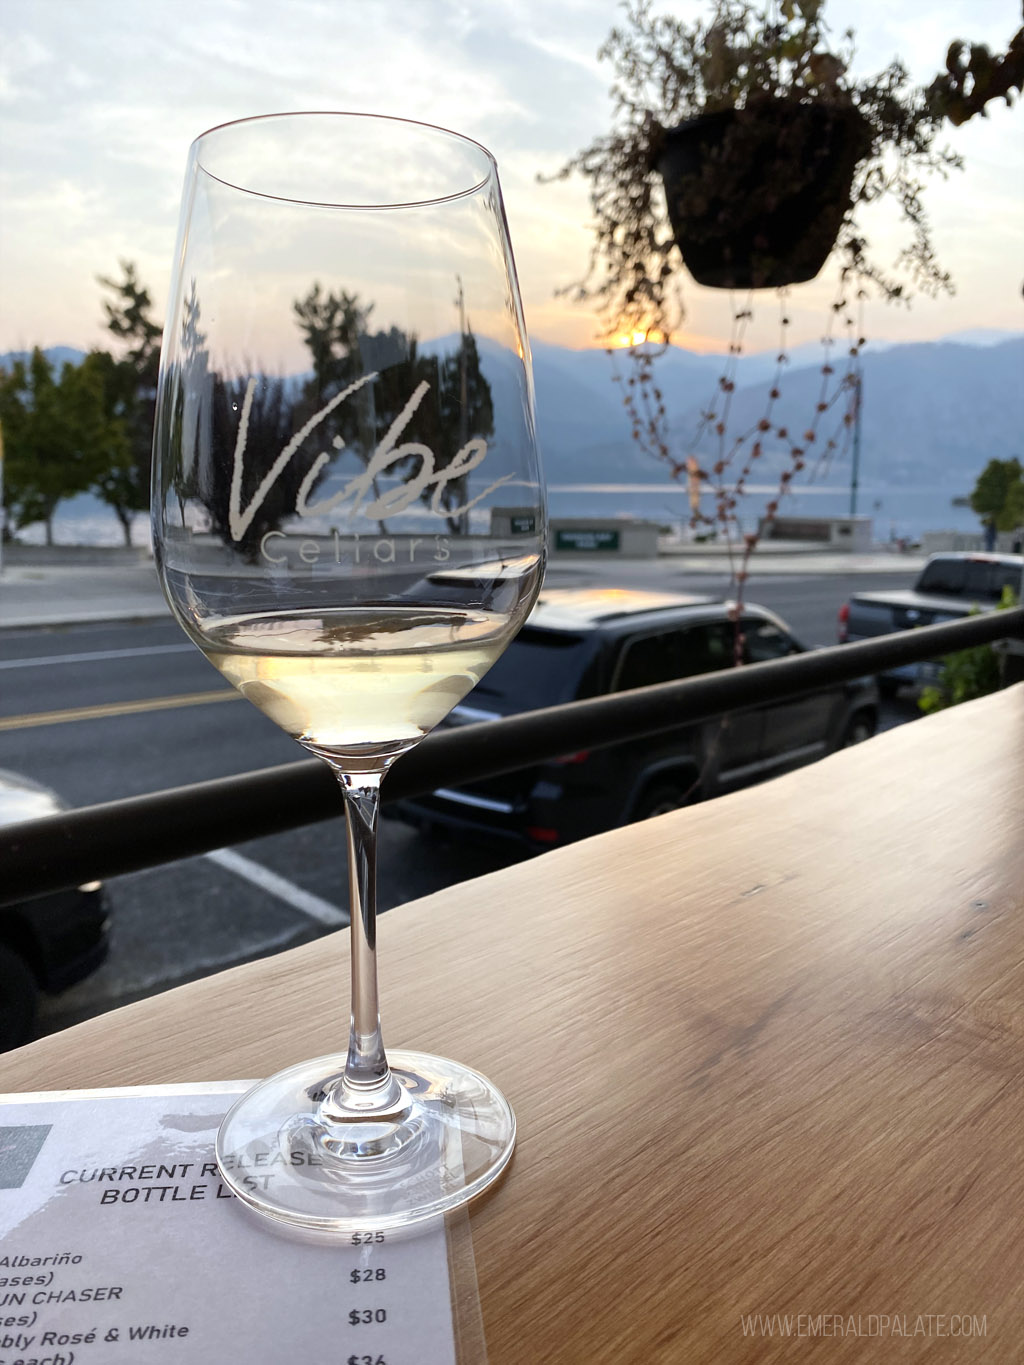 glass of white wine with Vibe Cellars logo and Manson Lake at sunset in the background